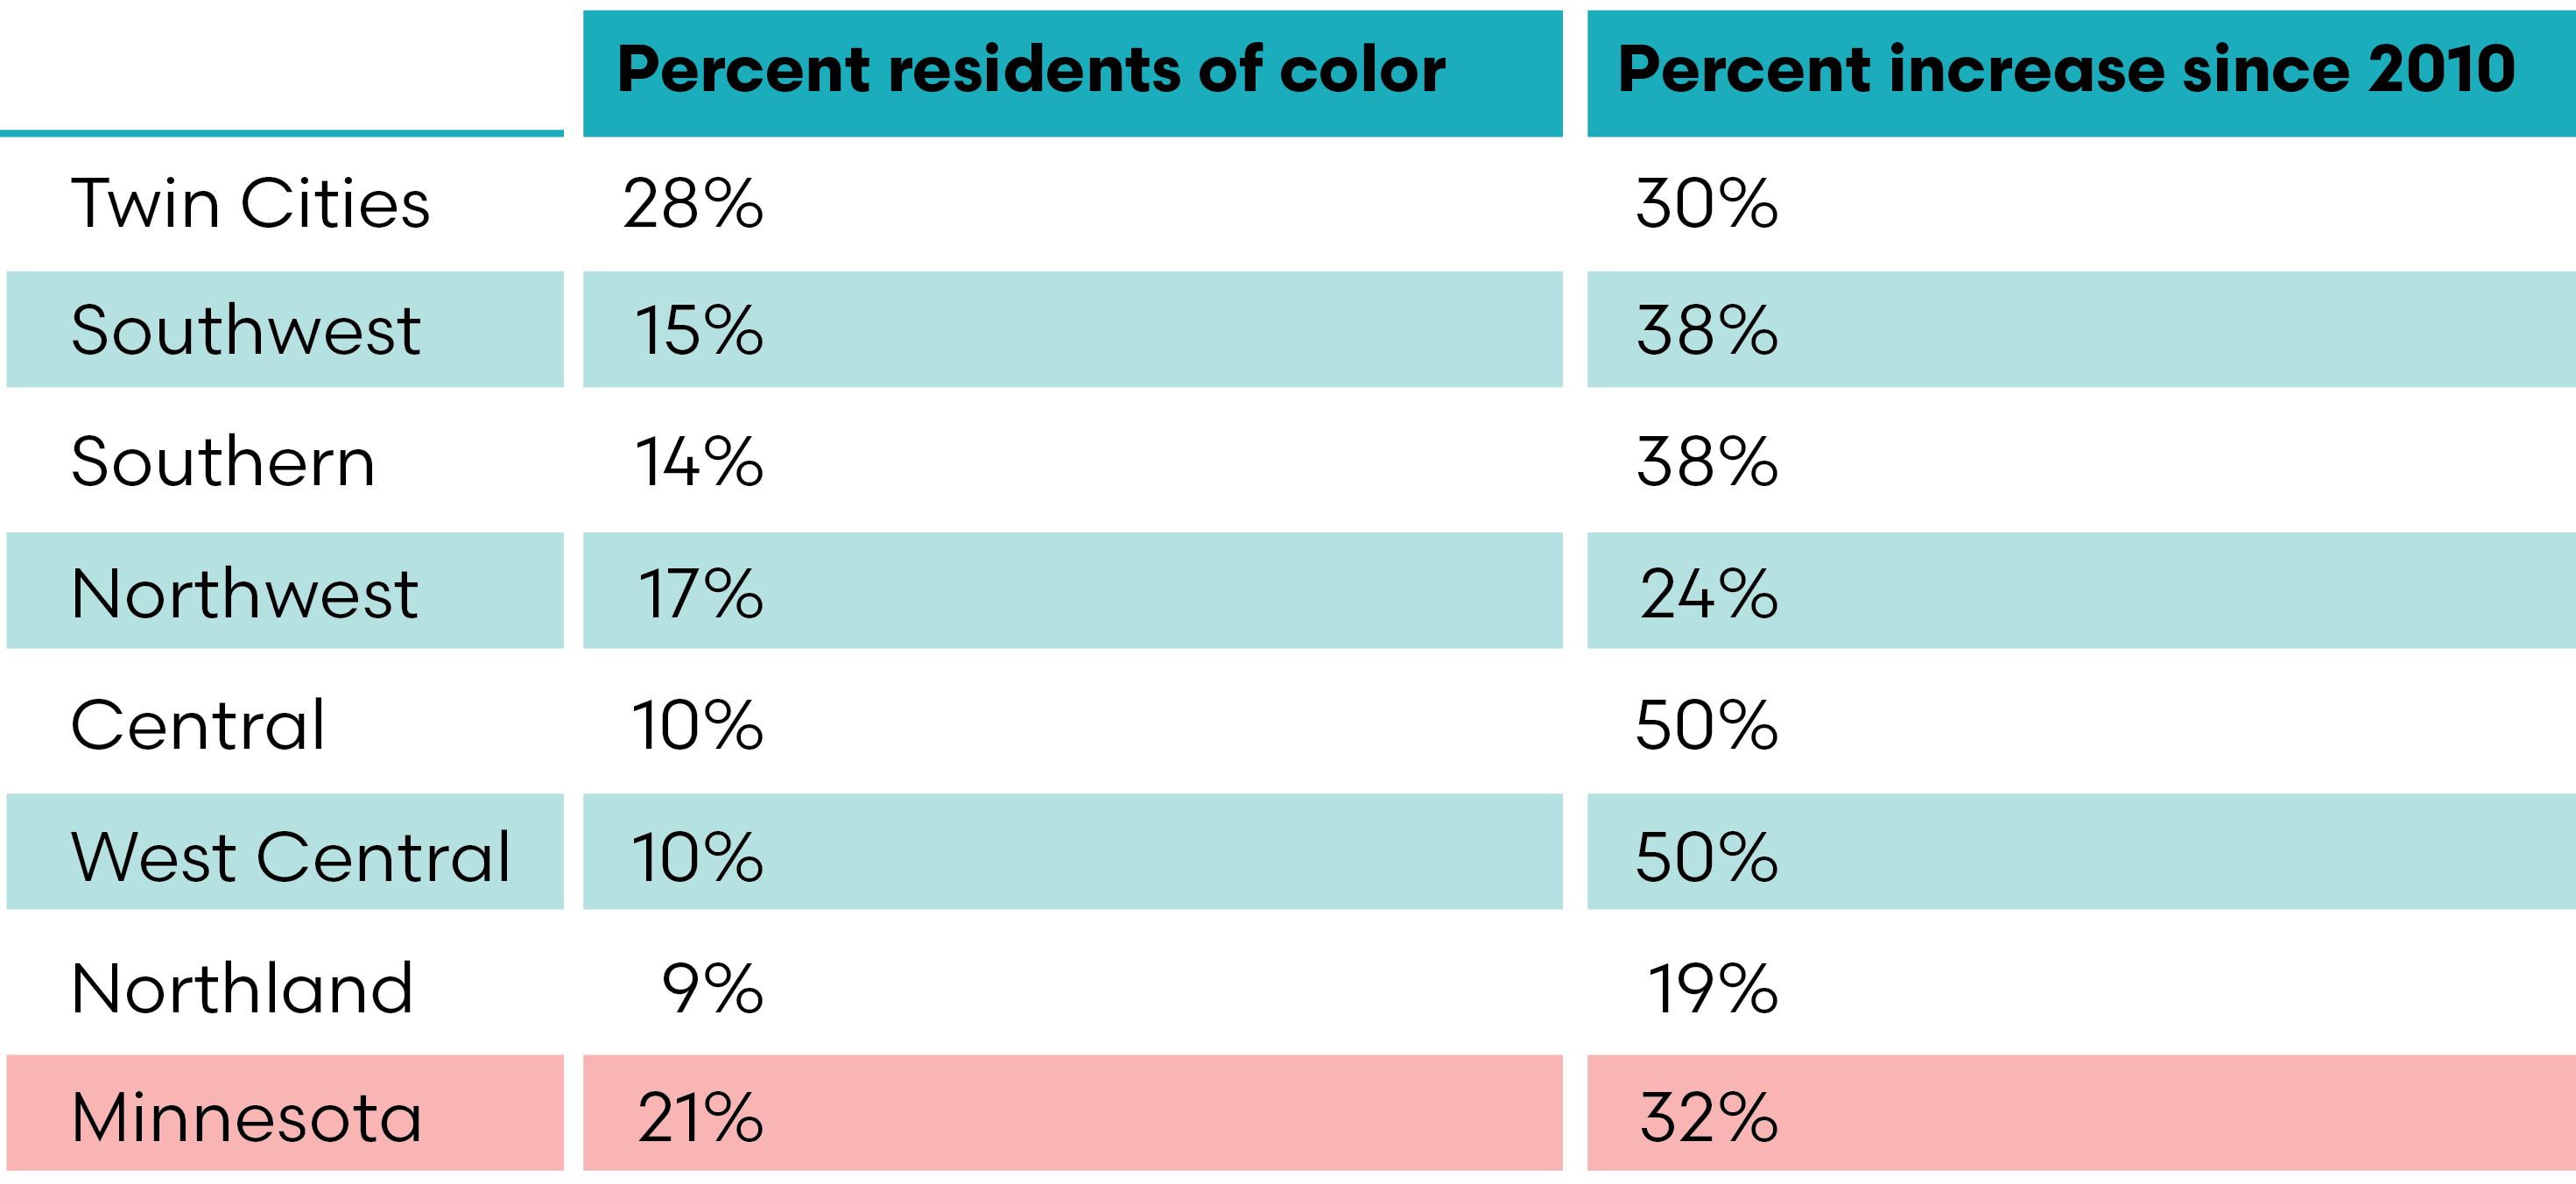 Table showing percent of residents of color in each Minnesota region